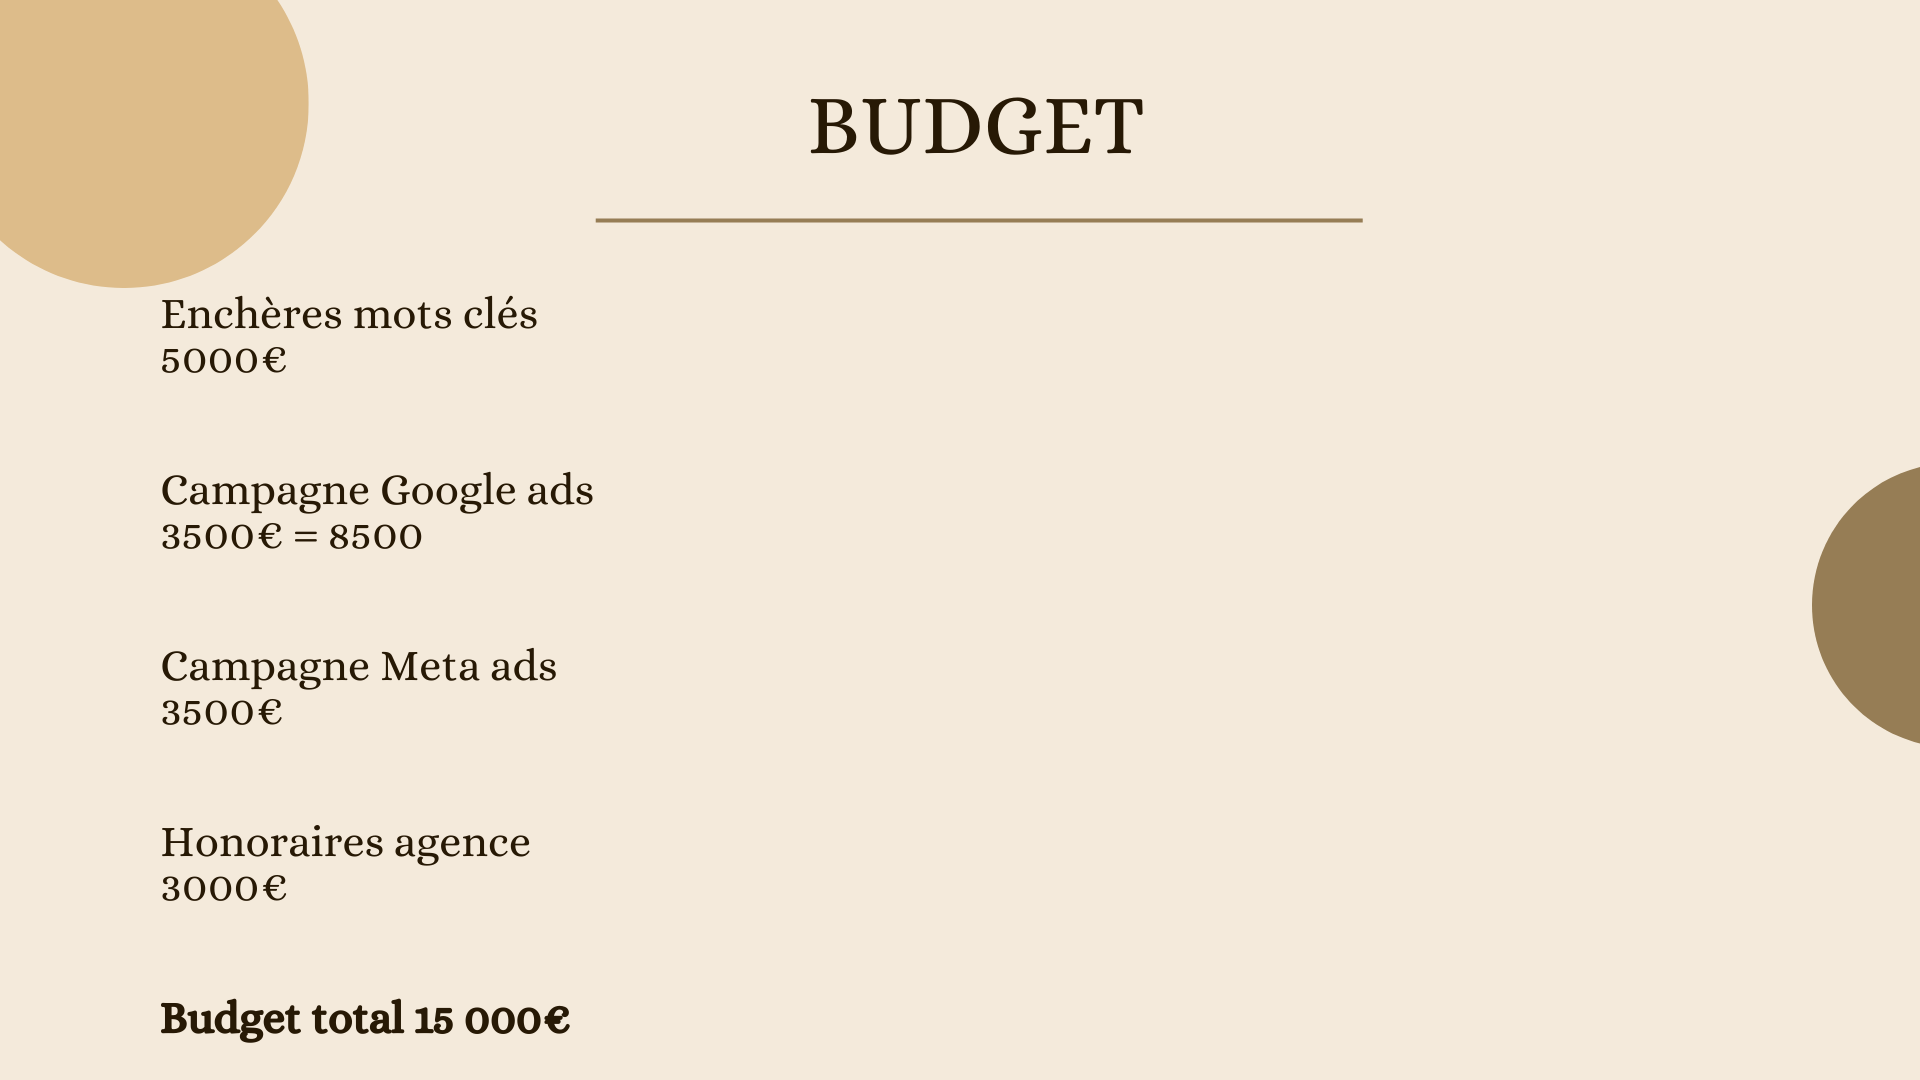 BUDGET

Enchères mots clés
5000€

Campagne Google ads
3500€ = 8500

Campagne Meta ads
3500€

Honoraires agence
3000€

Budget total 15 000€